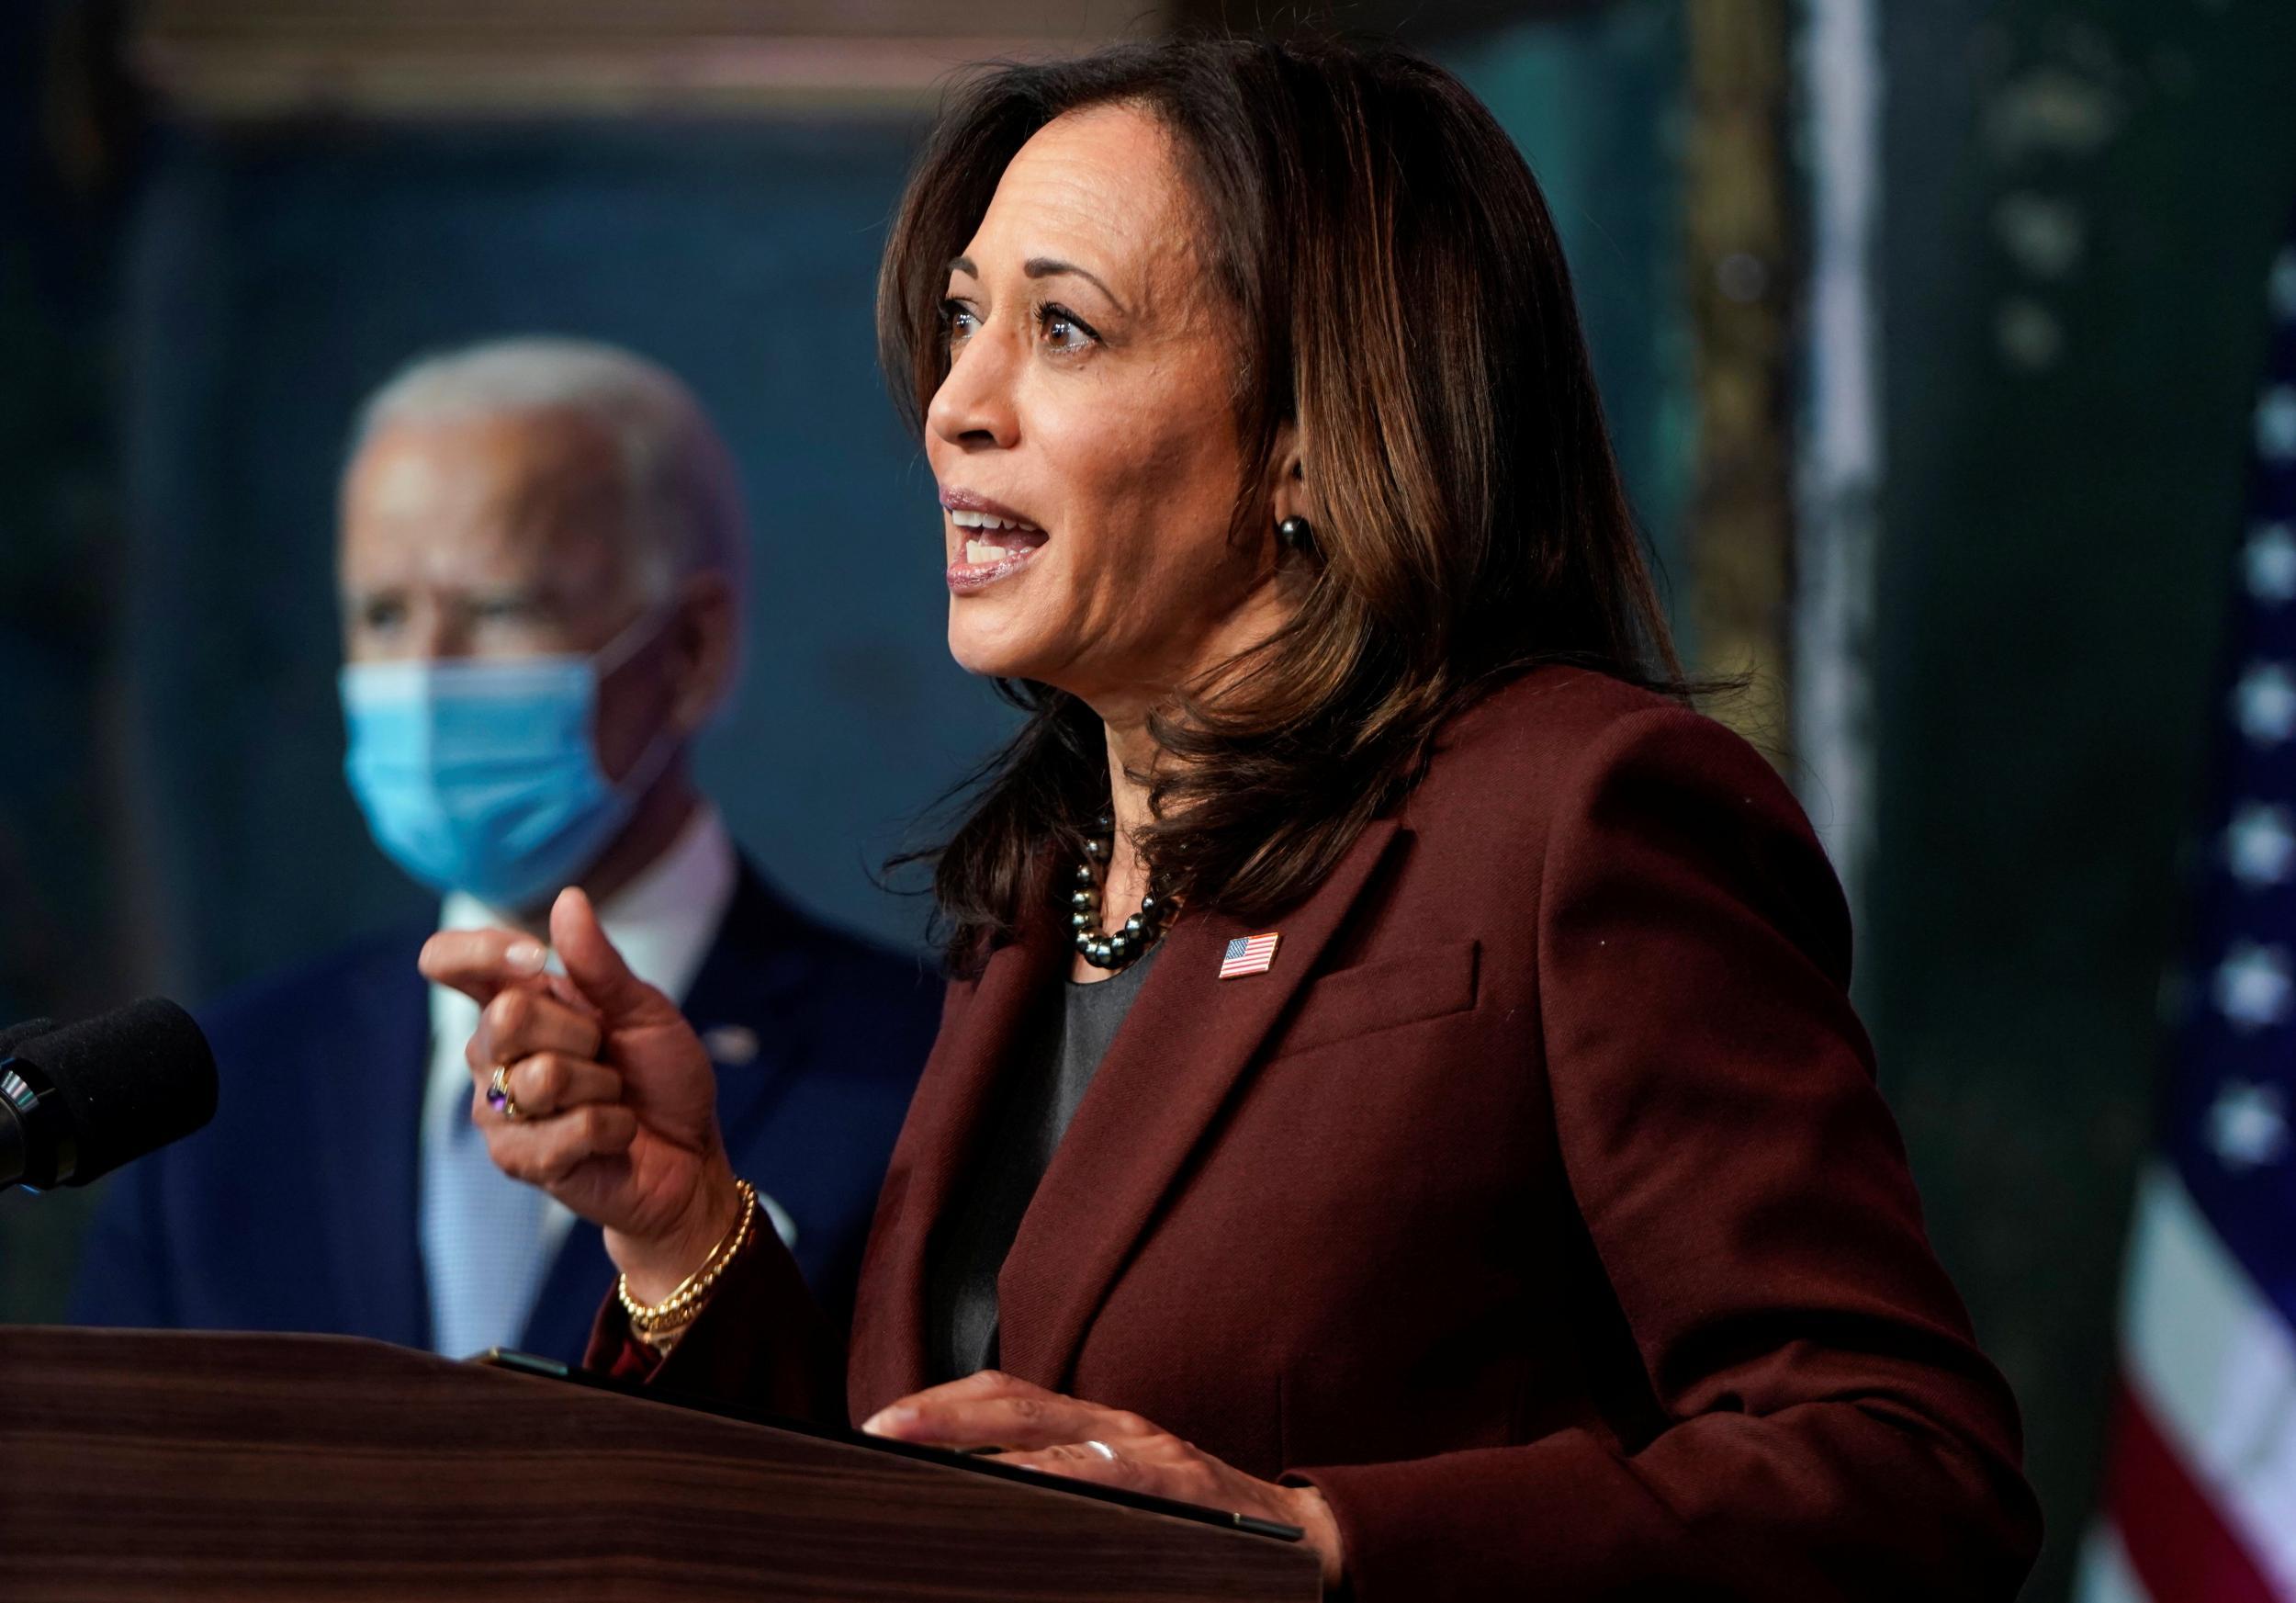 Kamala Harris was a smart pick, like many of the new appointments to Biden’s administration